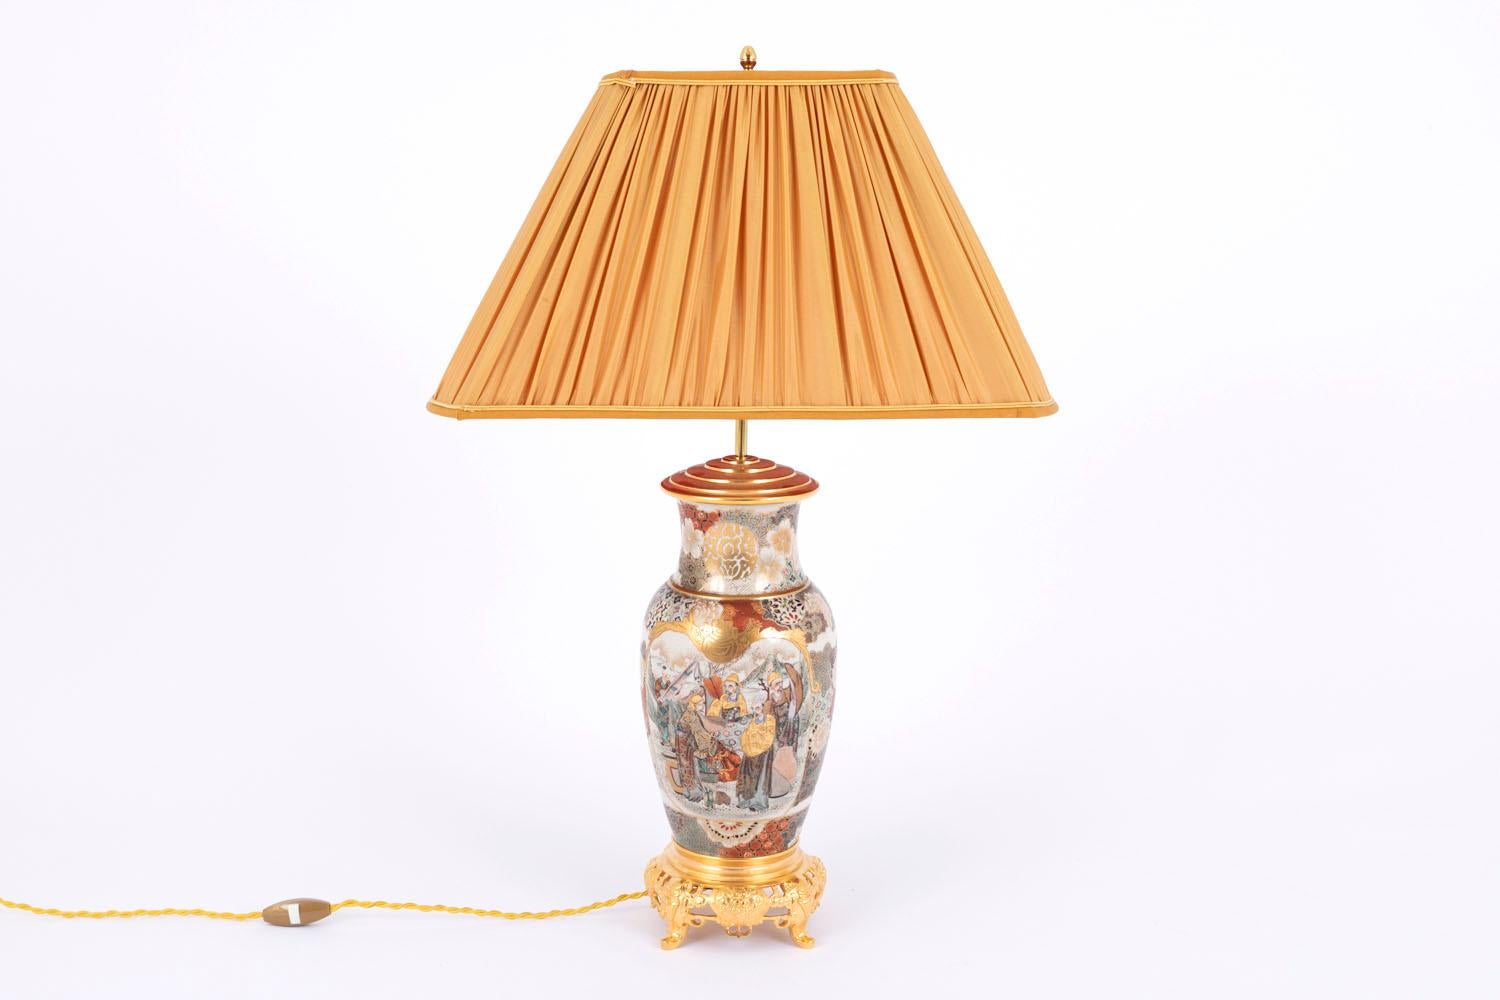 Satsuma earthenware lamp in baluster shape with polychrome enamels decoration on a white background mounted with chiselled and gilt bronze. Openwork decorated base standing on four small feet. 
Enameled decor on the body of the lamp with large